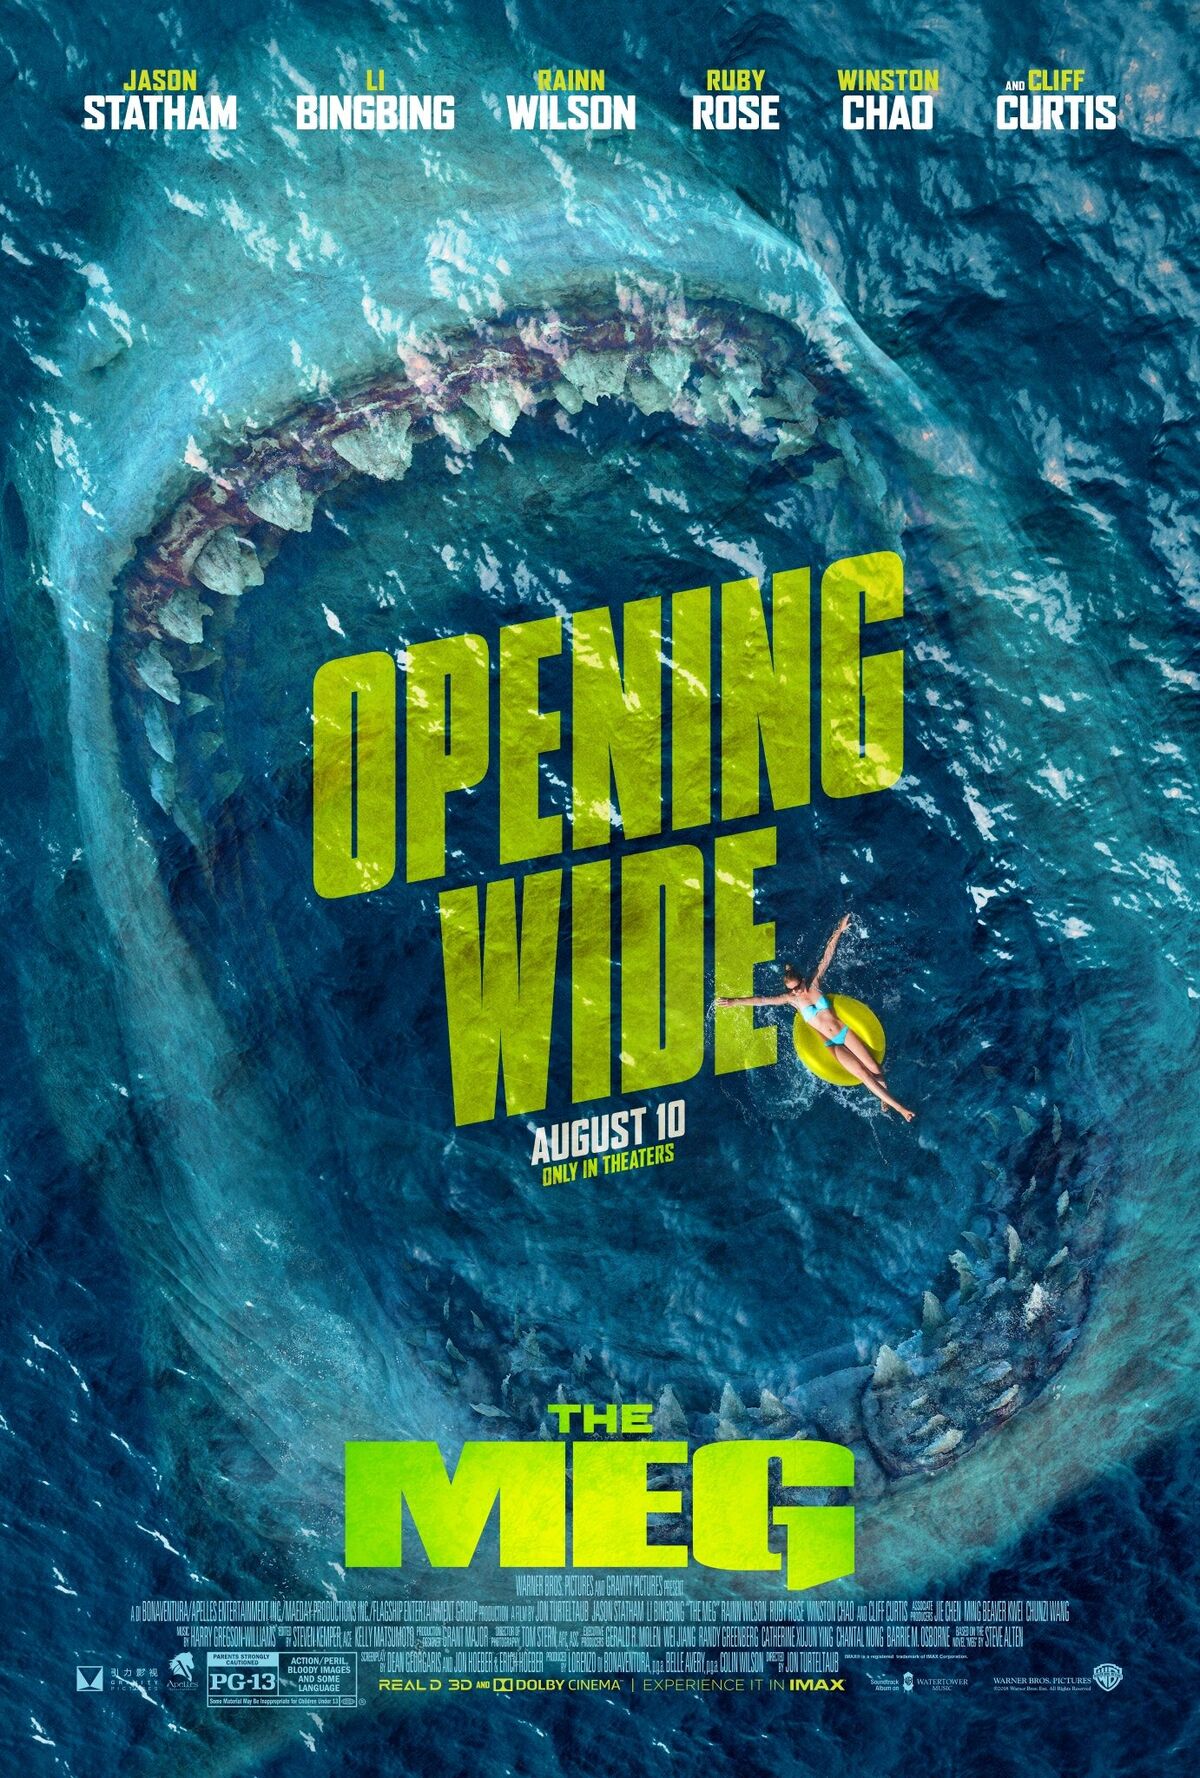 https://static.wikia.nocookie.net/warner-bros-entertainment/images/5/5c/The_Meg_poster.jpg/revision/latest/scale-to-width-down/1200?cb=20180810200223